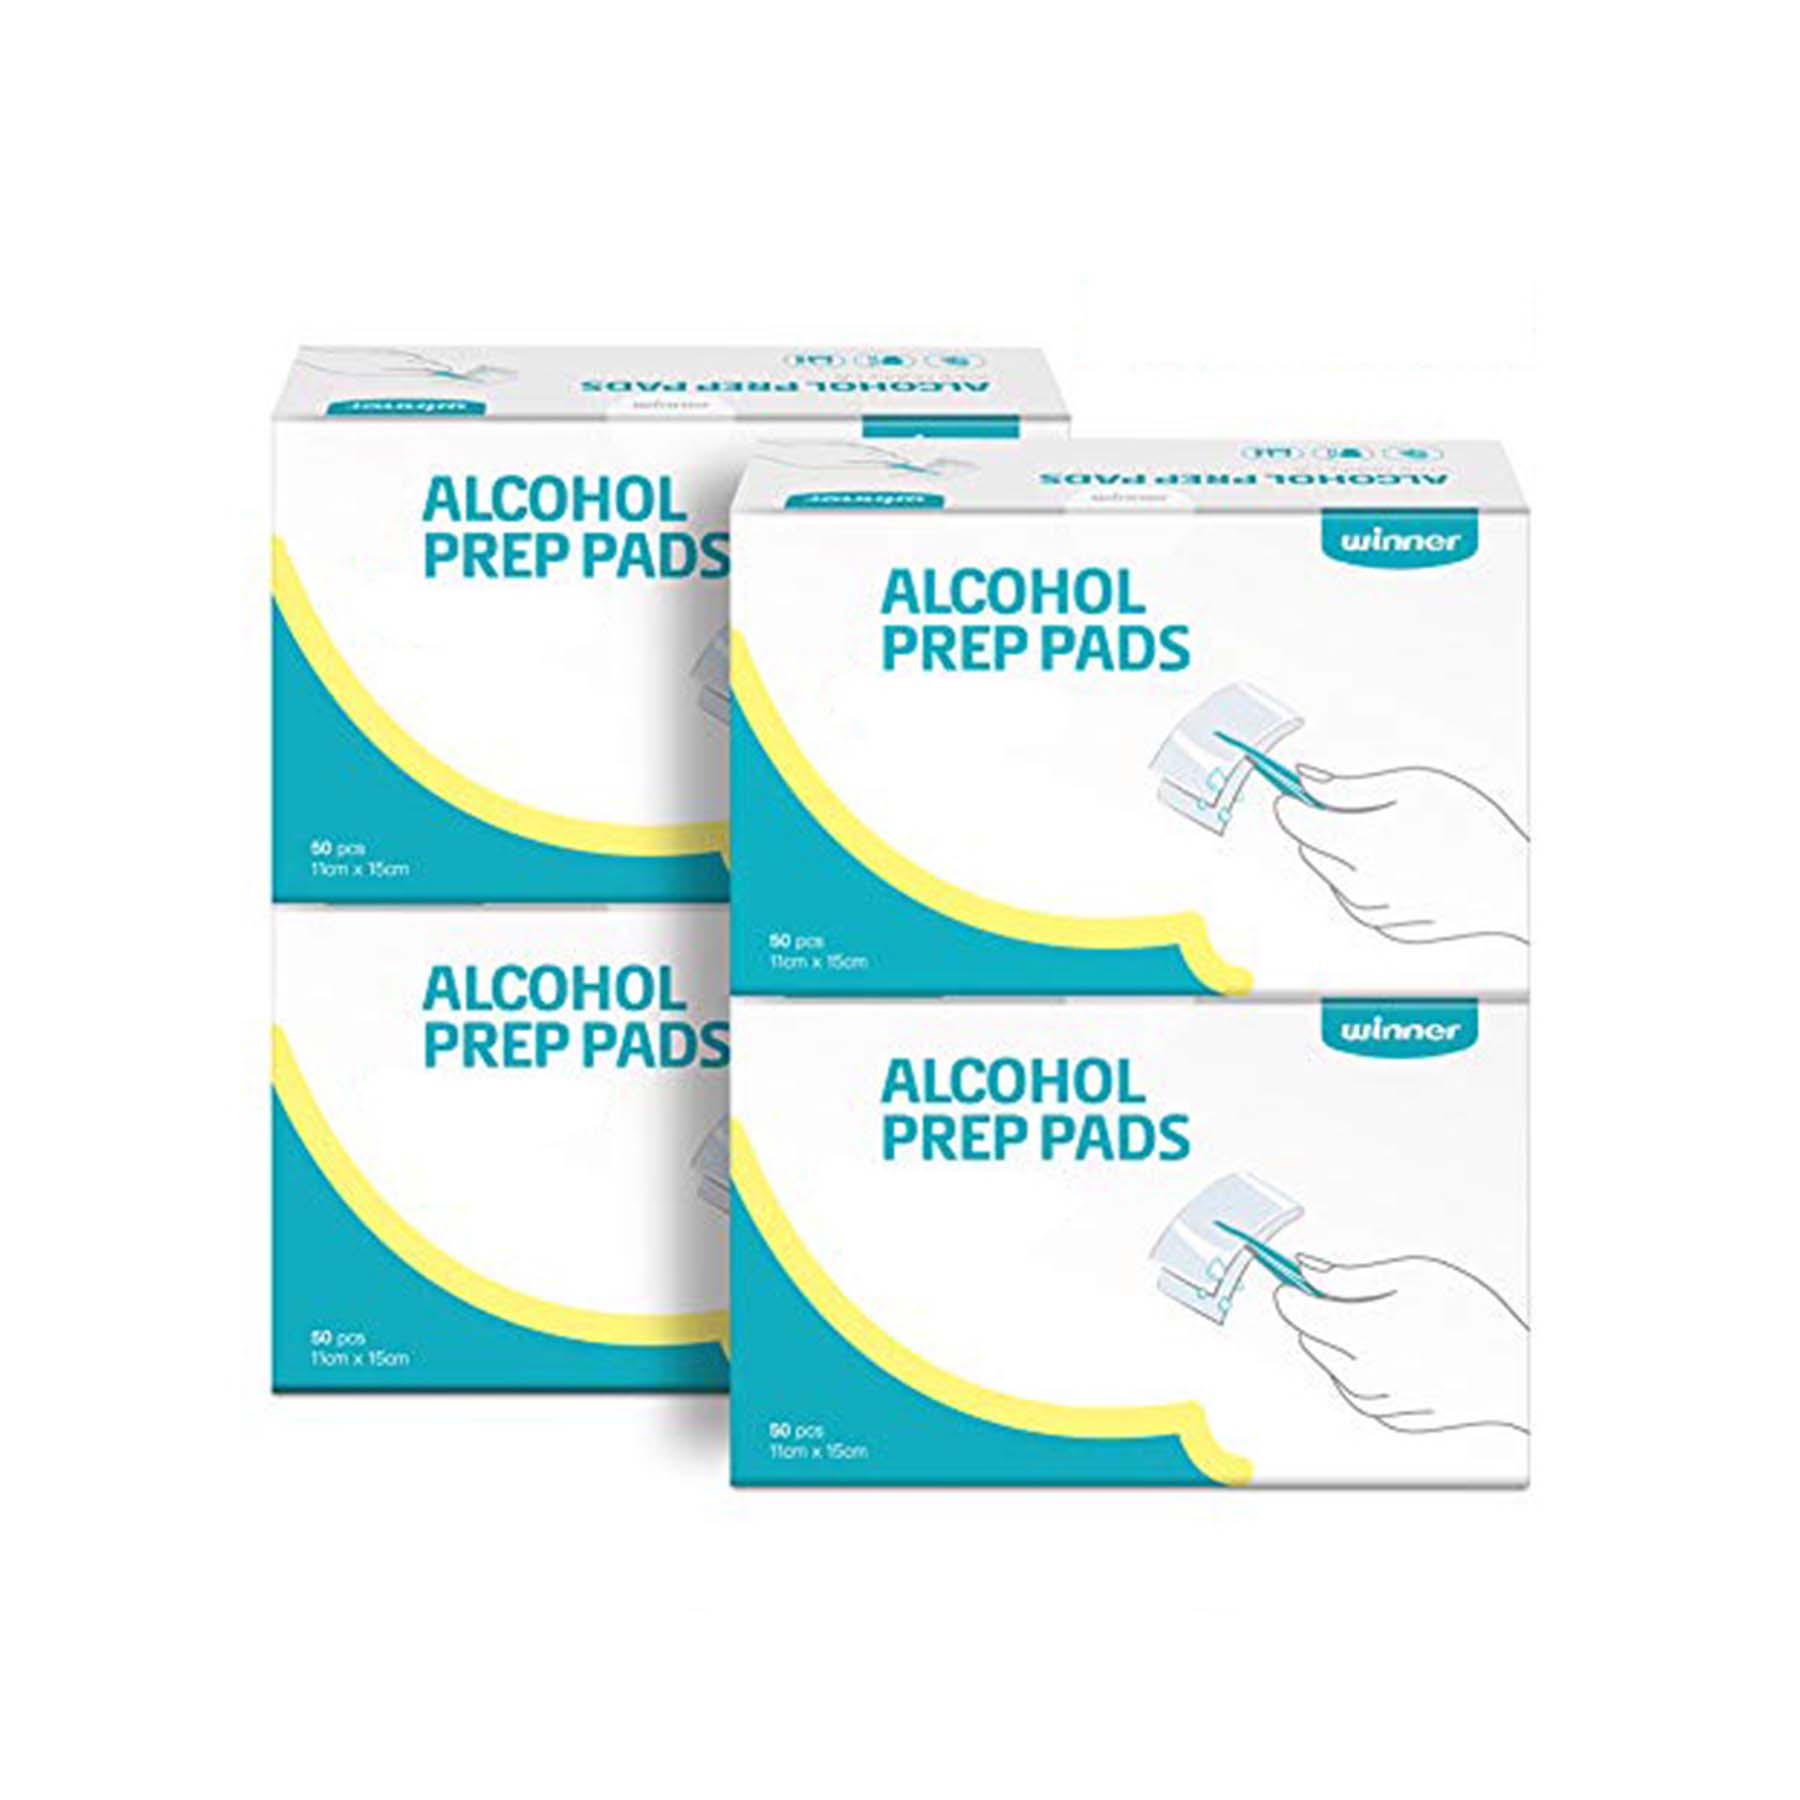 Winner Sterile Alcohol Prep Pads Large Alcohol Rubbing Pad for Skin Alcohol Cleaning Pads for Injecttion Individual wrapped 4-Ply 200 Counts